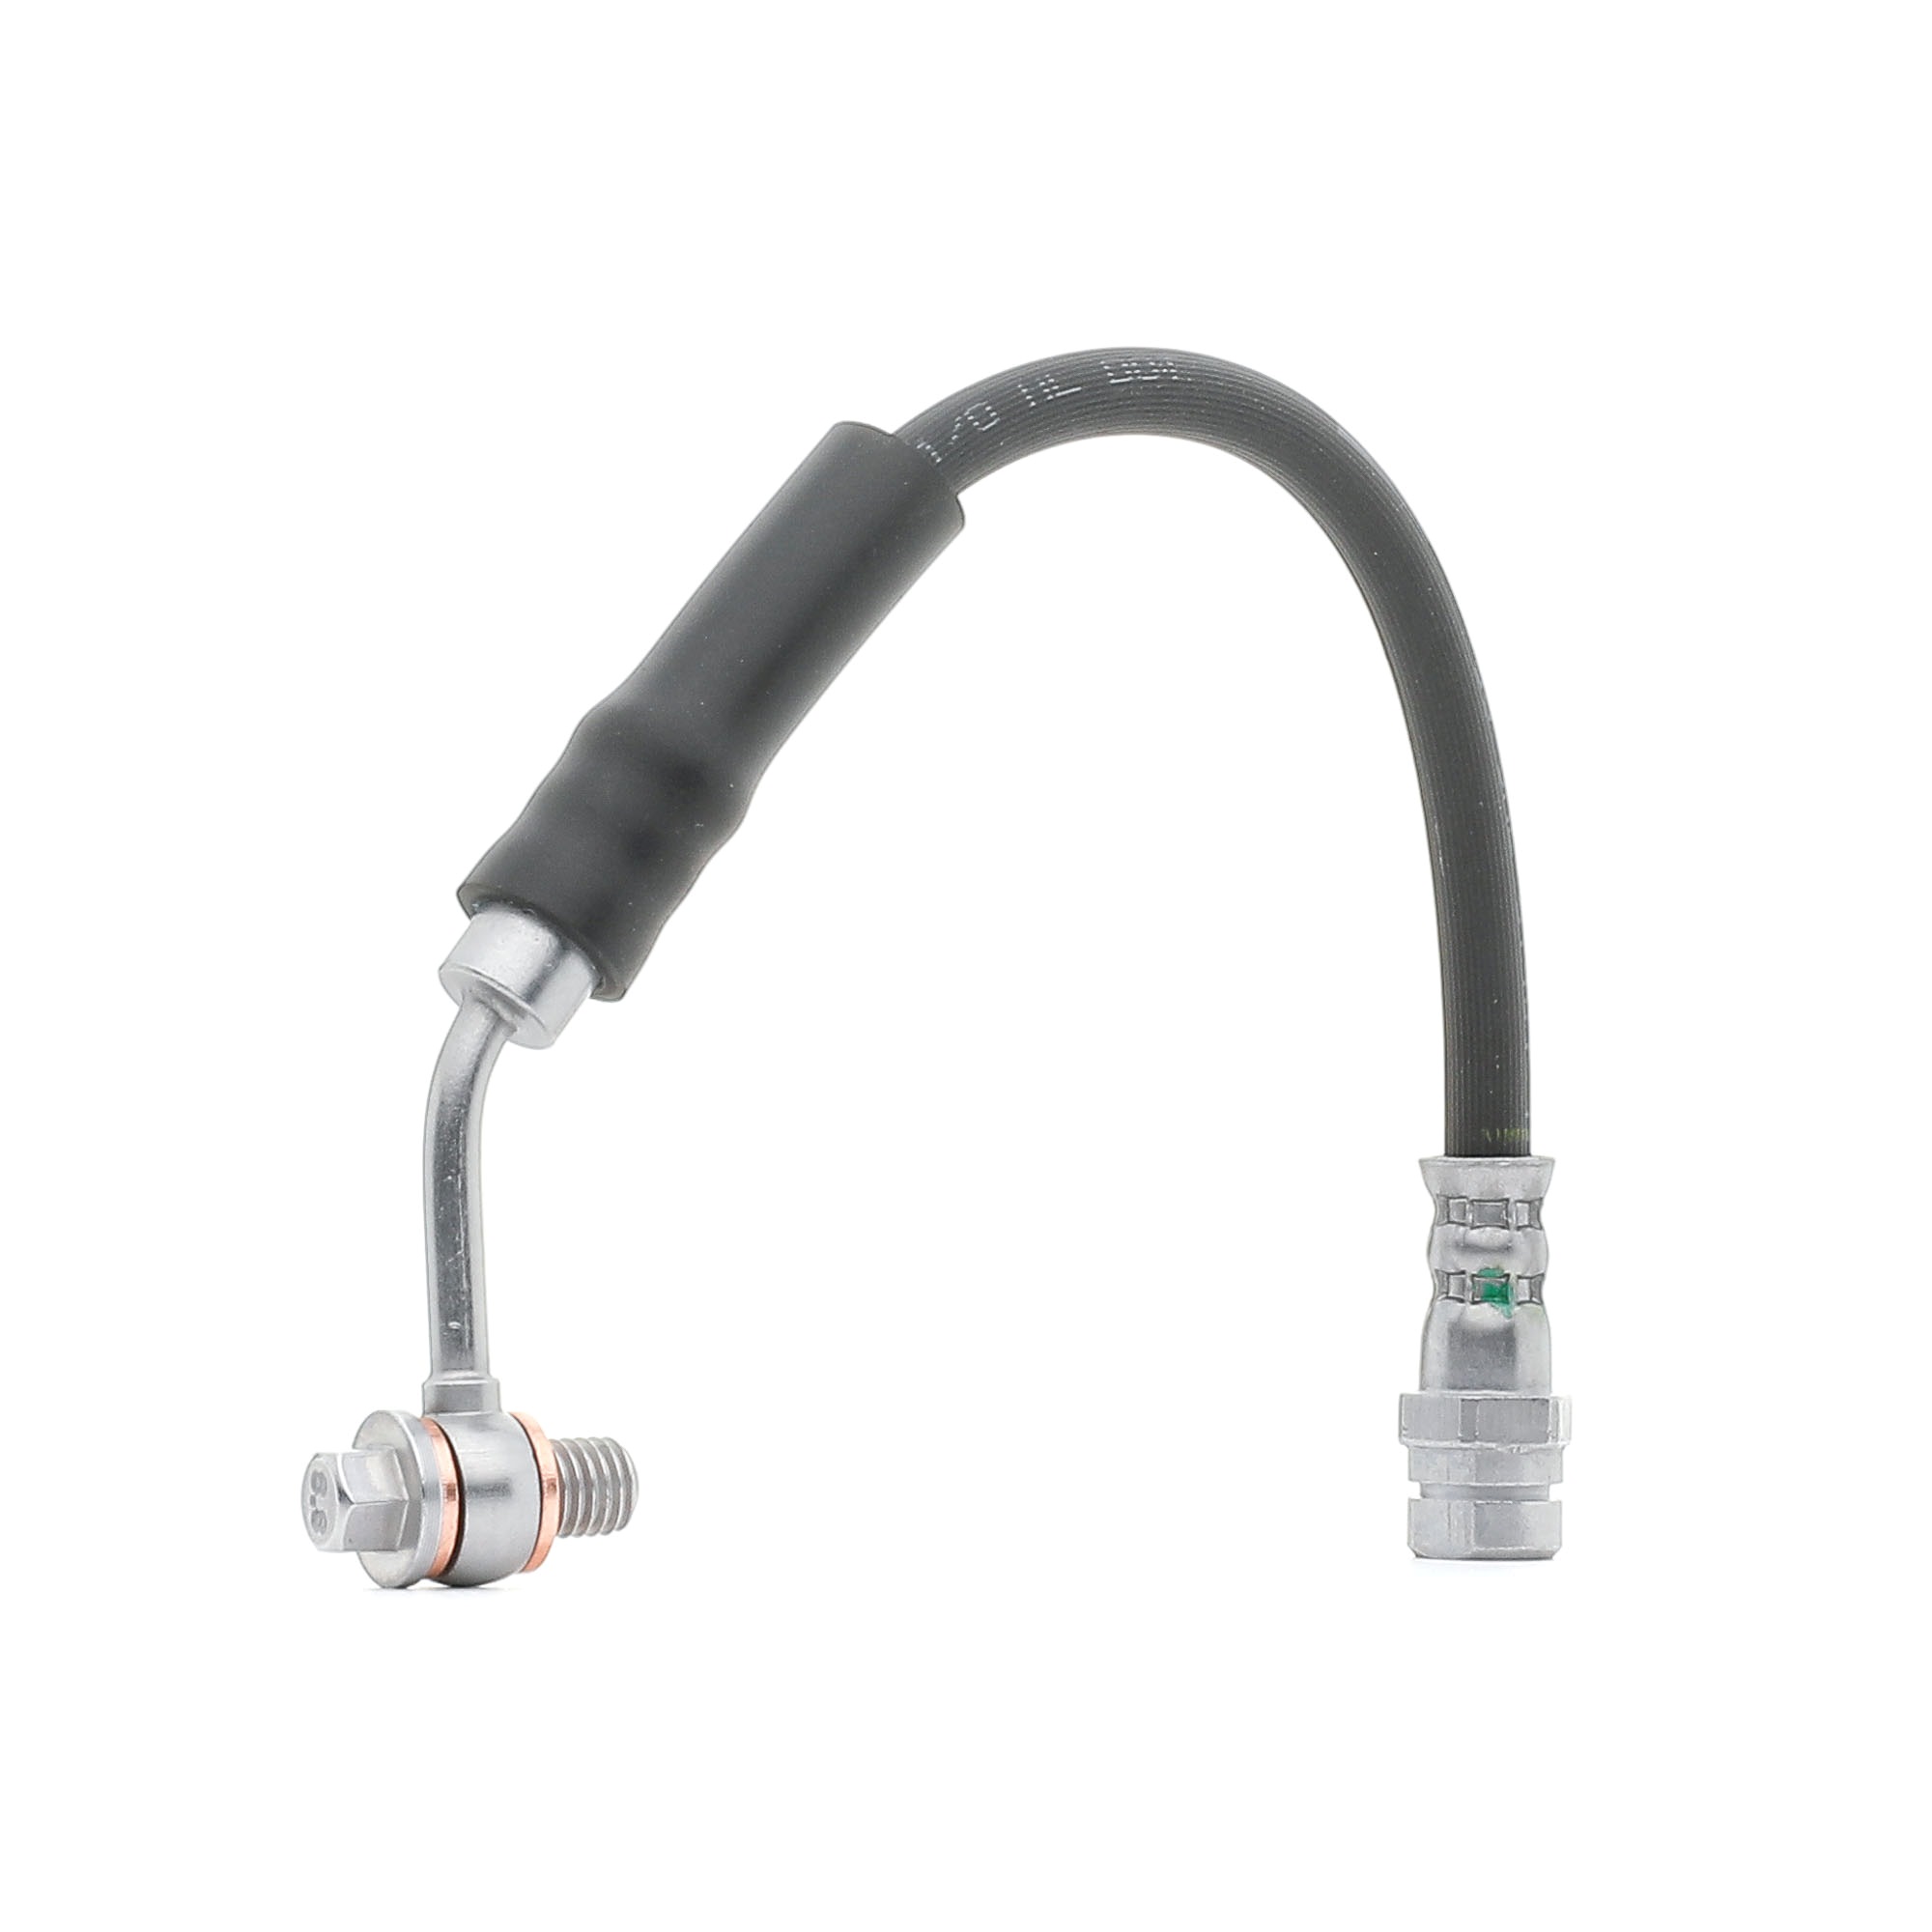 Brake hose TRW PHD2019 - Volkswagen Golf Sportsvan (AM1, AN1) Pipes and hoses spare parts order